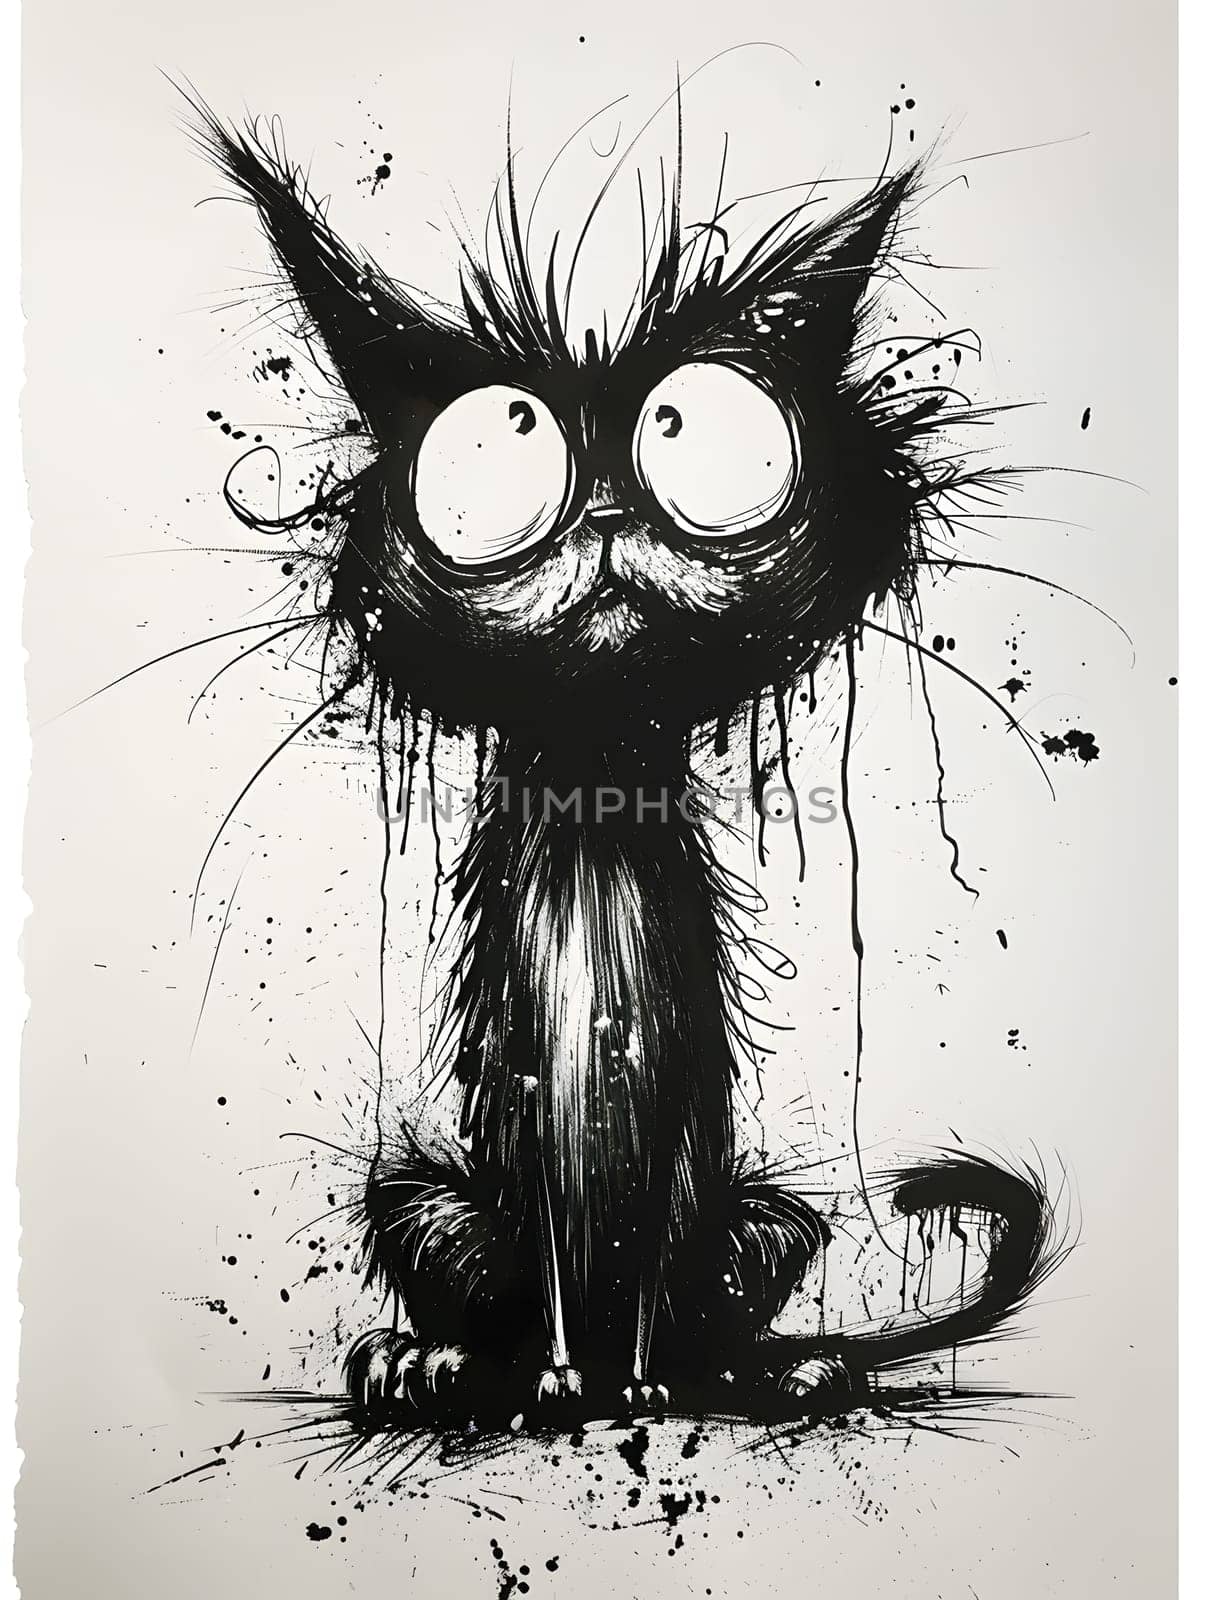 Monochrome illustration of a Felidae with big eyes and whiskers by Nadtochiy